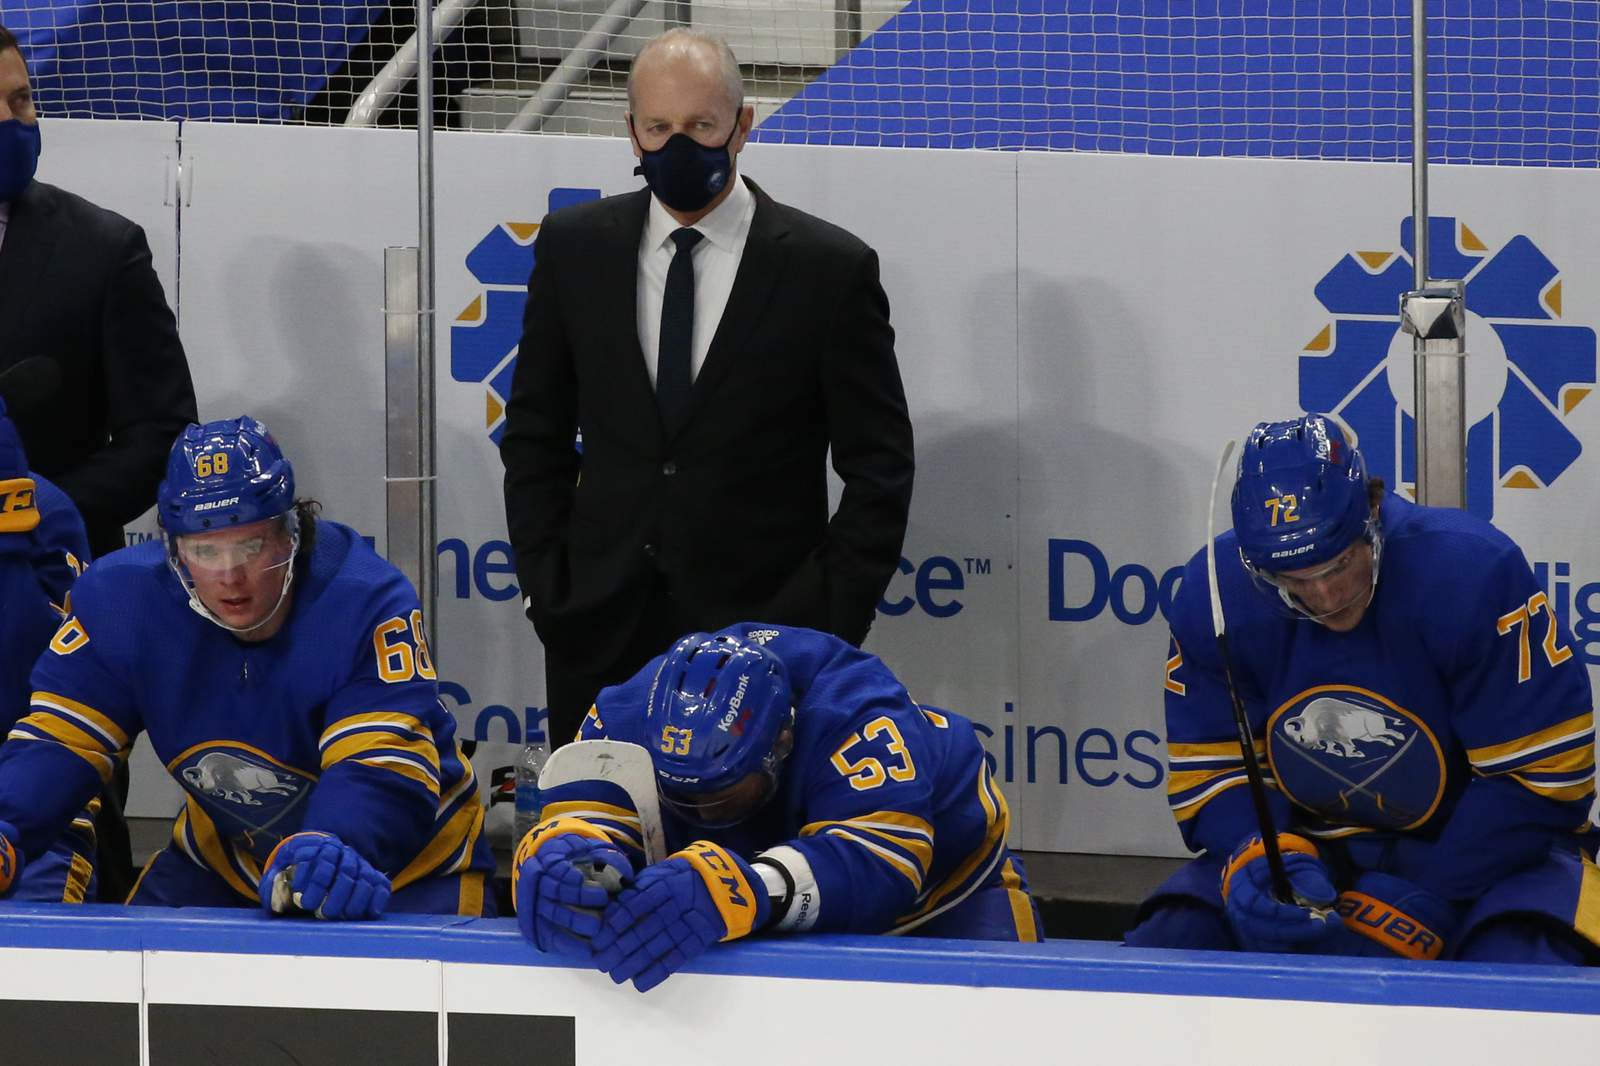 Sabres fire coach Krueger while in midst of 12-game skid